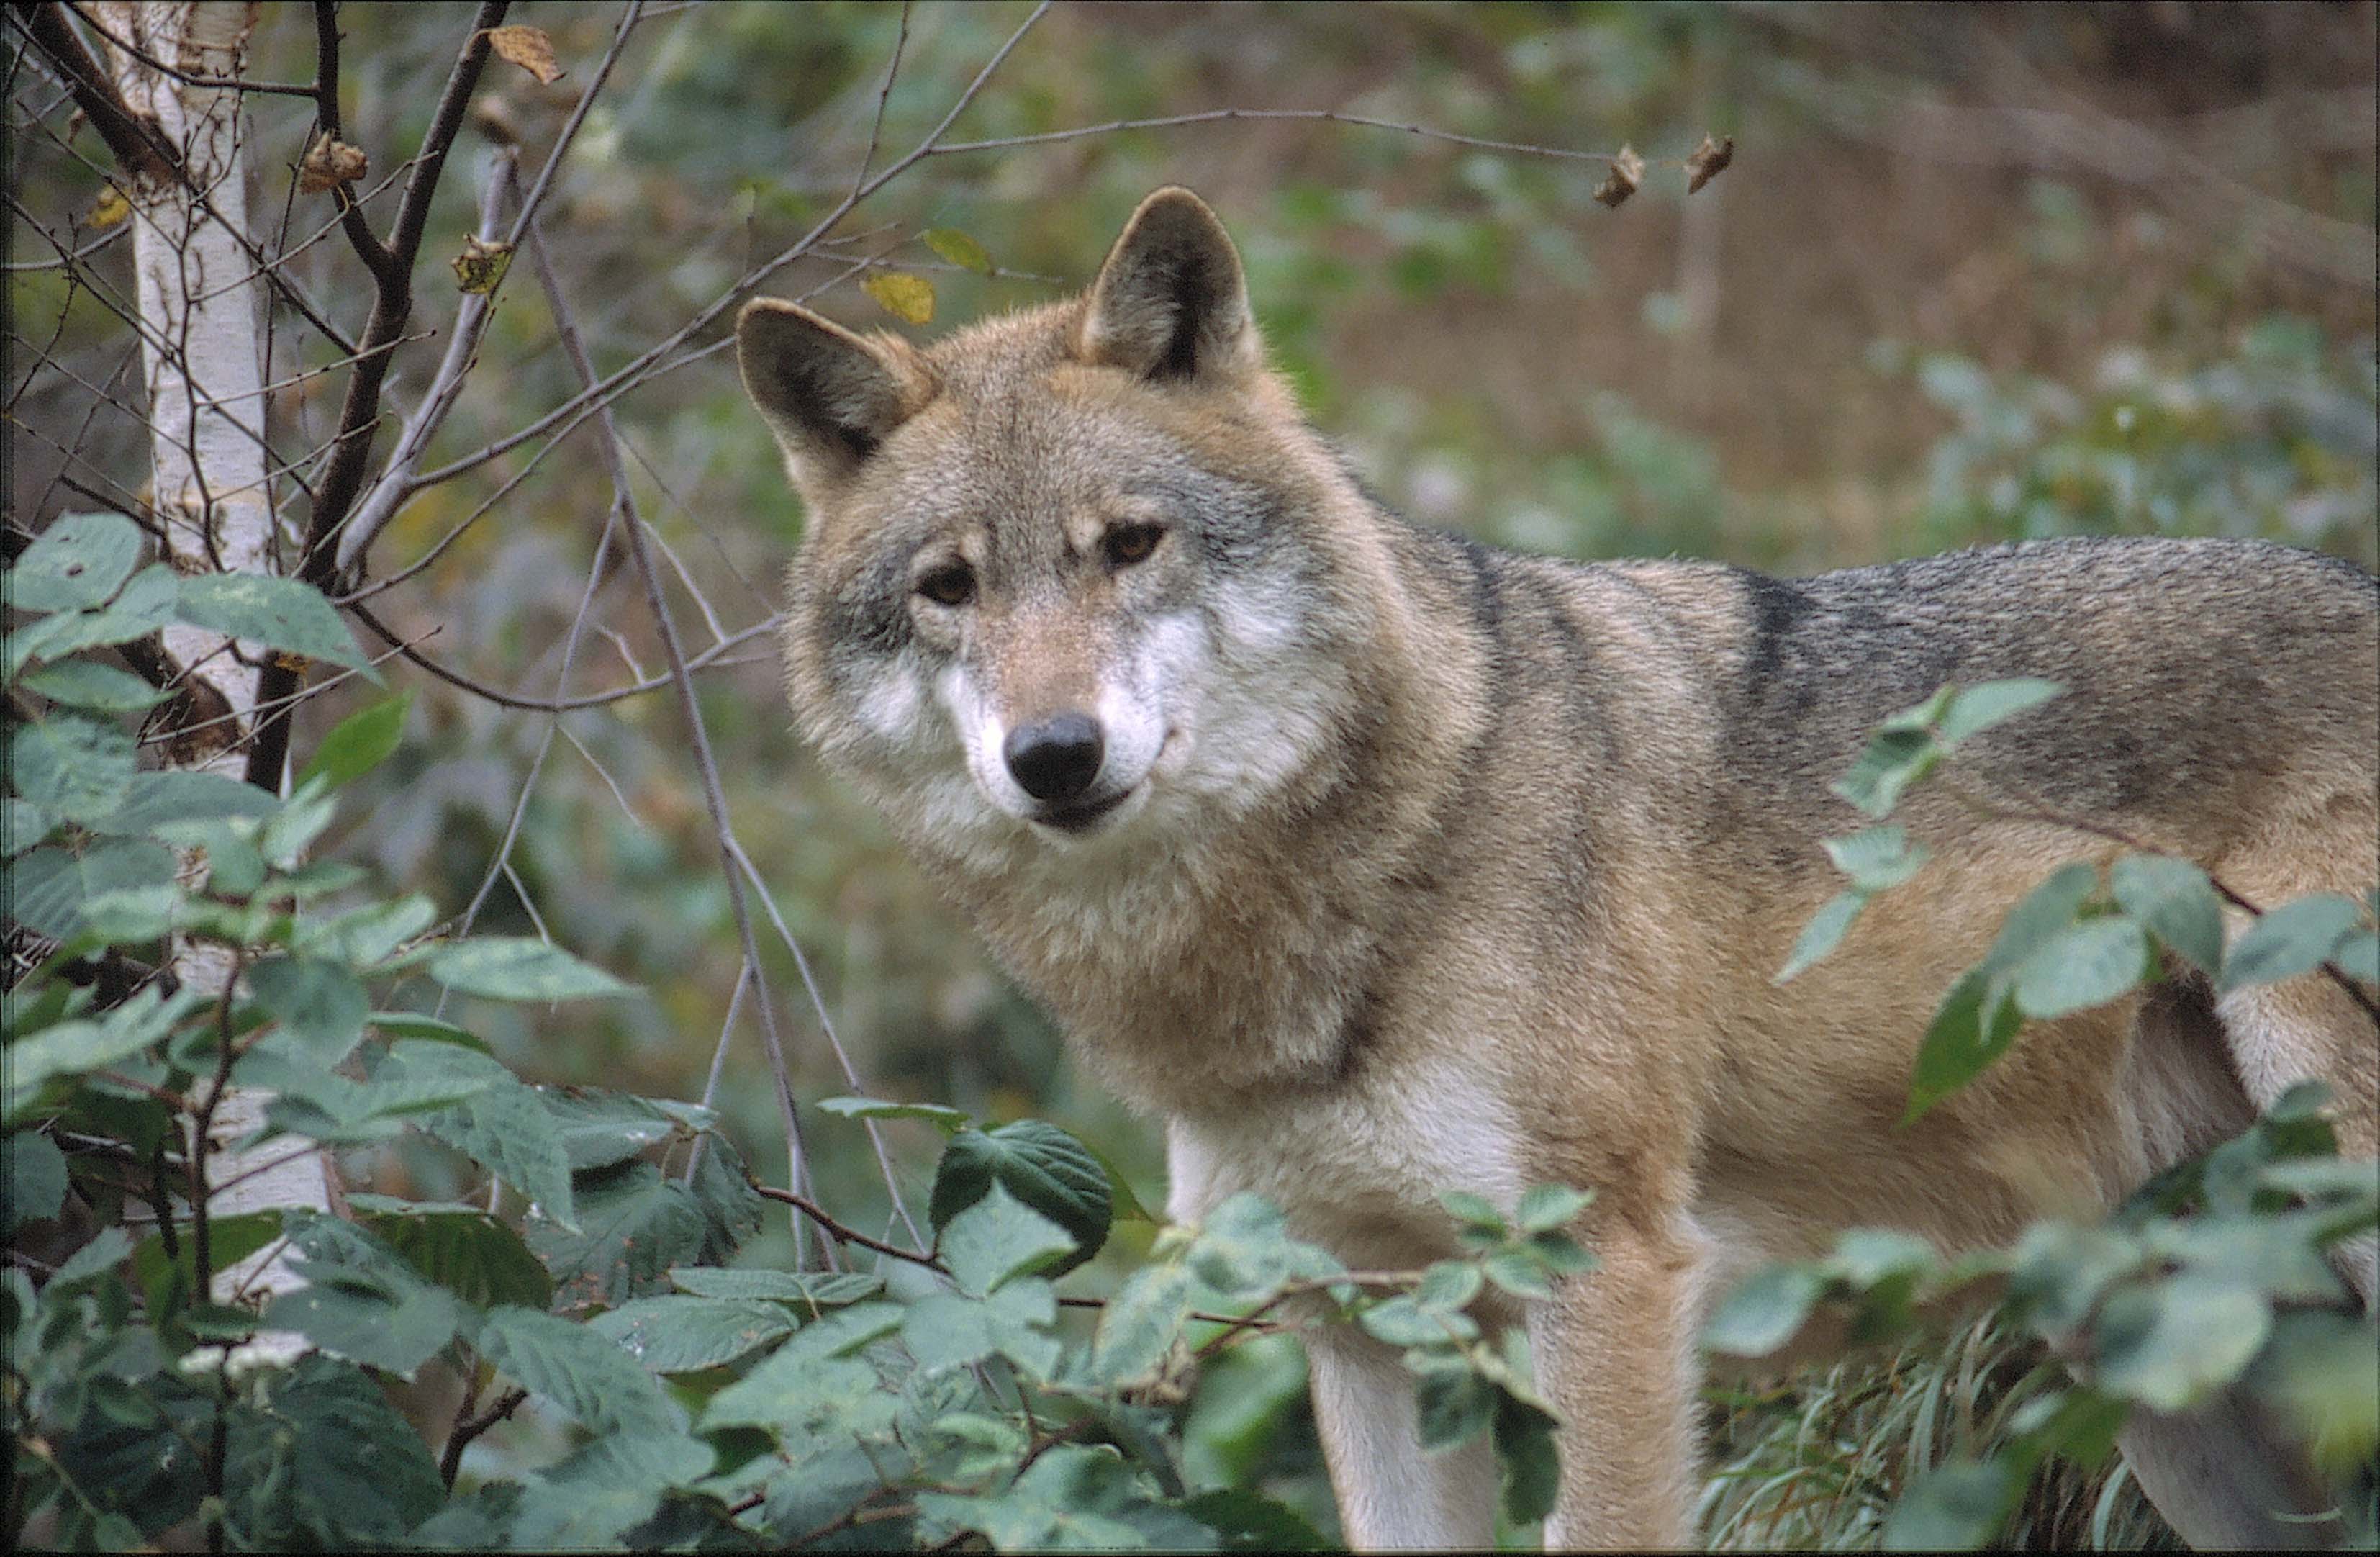 Wolf standing in a shrubby landscape and looking directly into the camera.